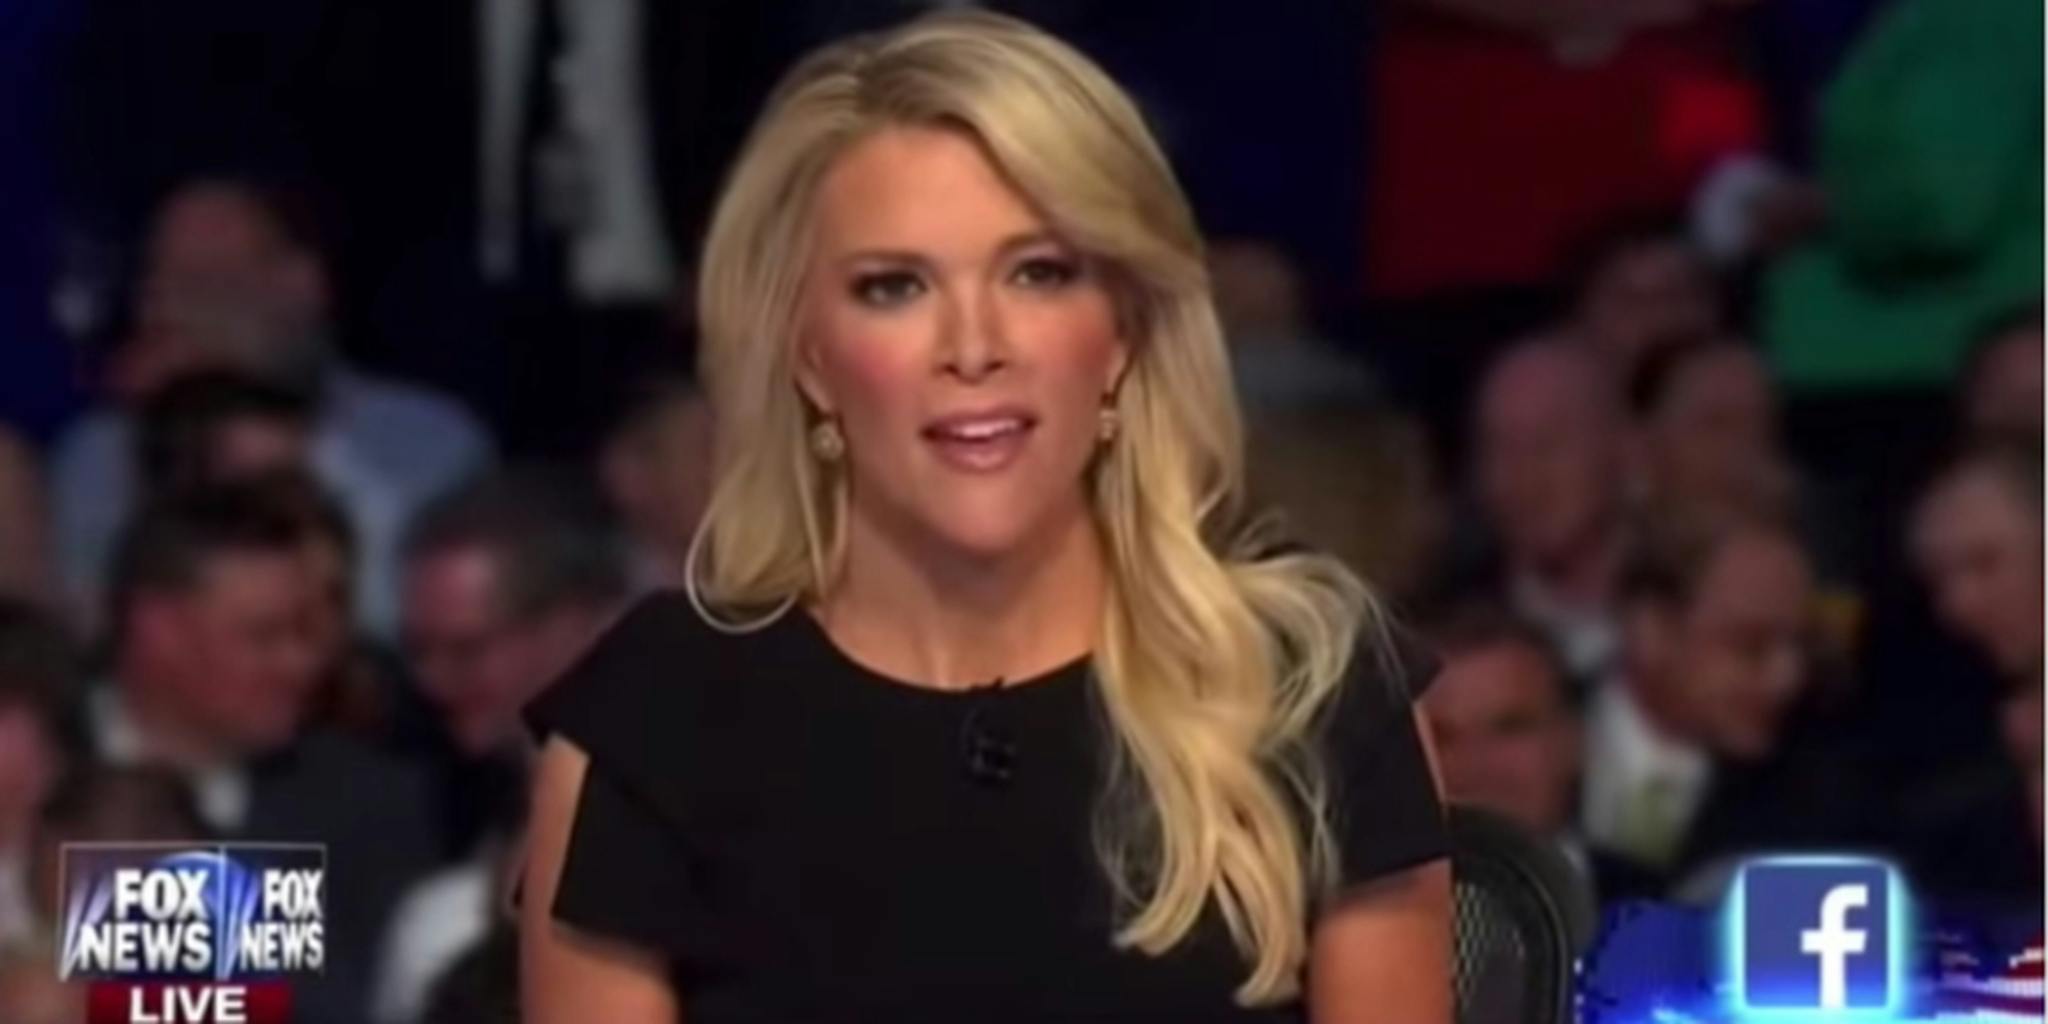 Fox News calls out Donald Trump's 'obsession' with Megyn Kelly